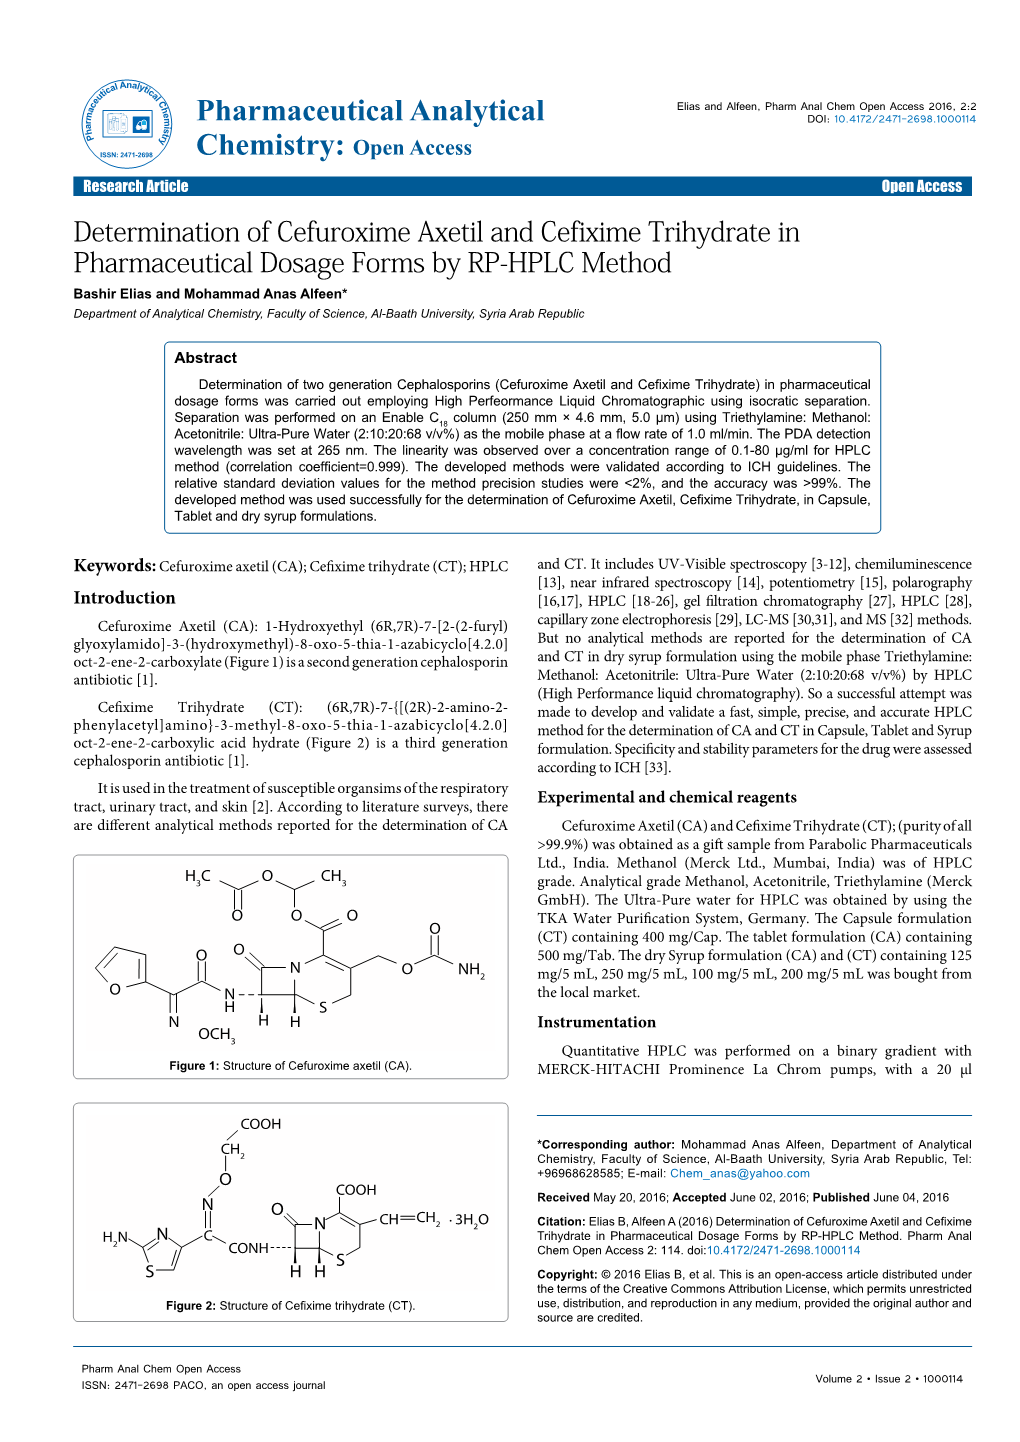 Determination of Cefuroxime Axetil and Cefixime Trihydrate In